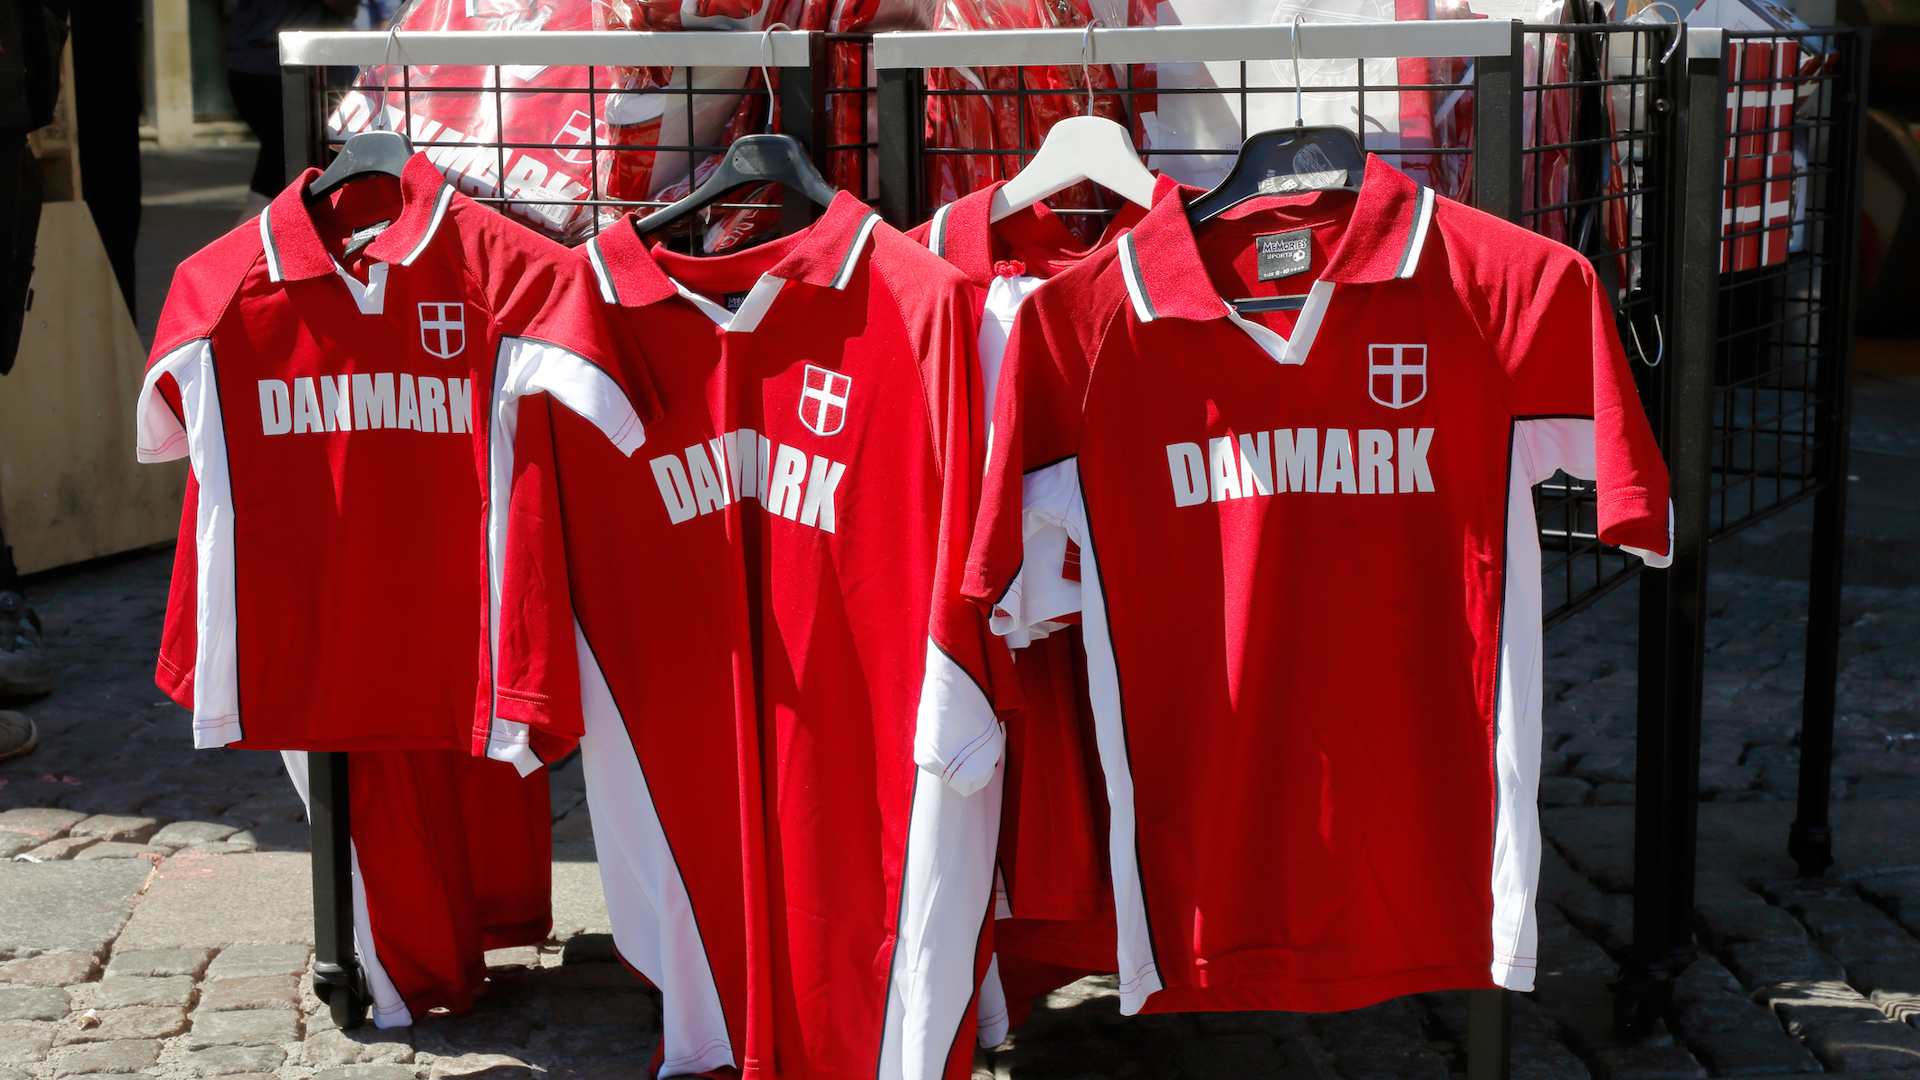 A selection of Denmark football shirts in a market